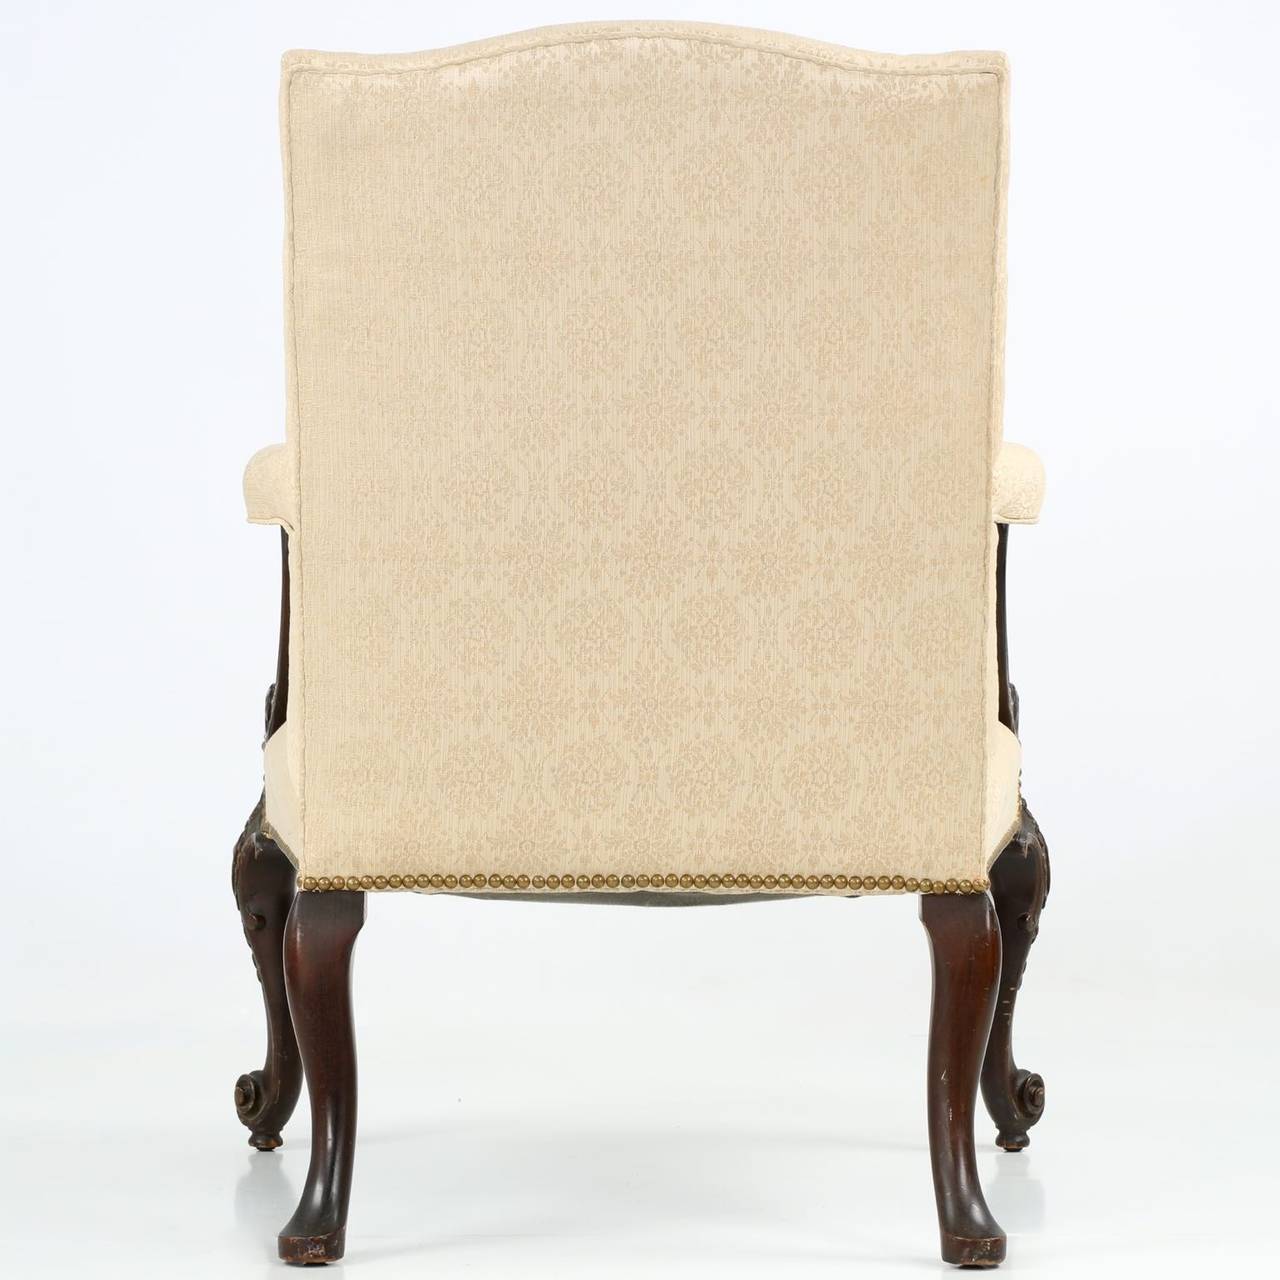 Great Britain (UK) English Chippendale Style Mahogany Open Arm Antique Chair, circa 1890